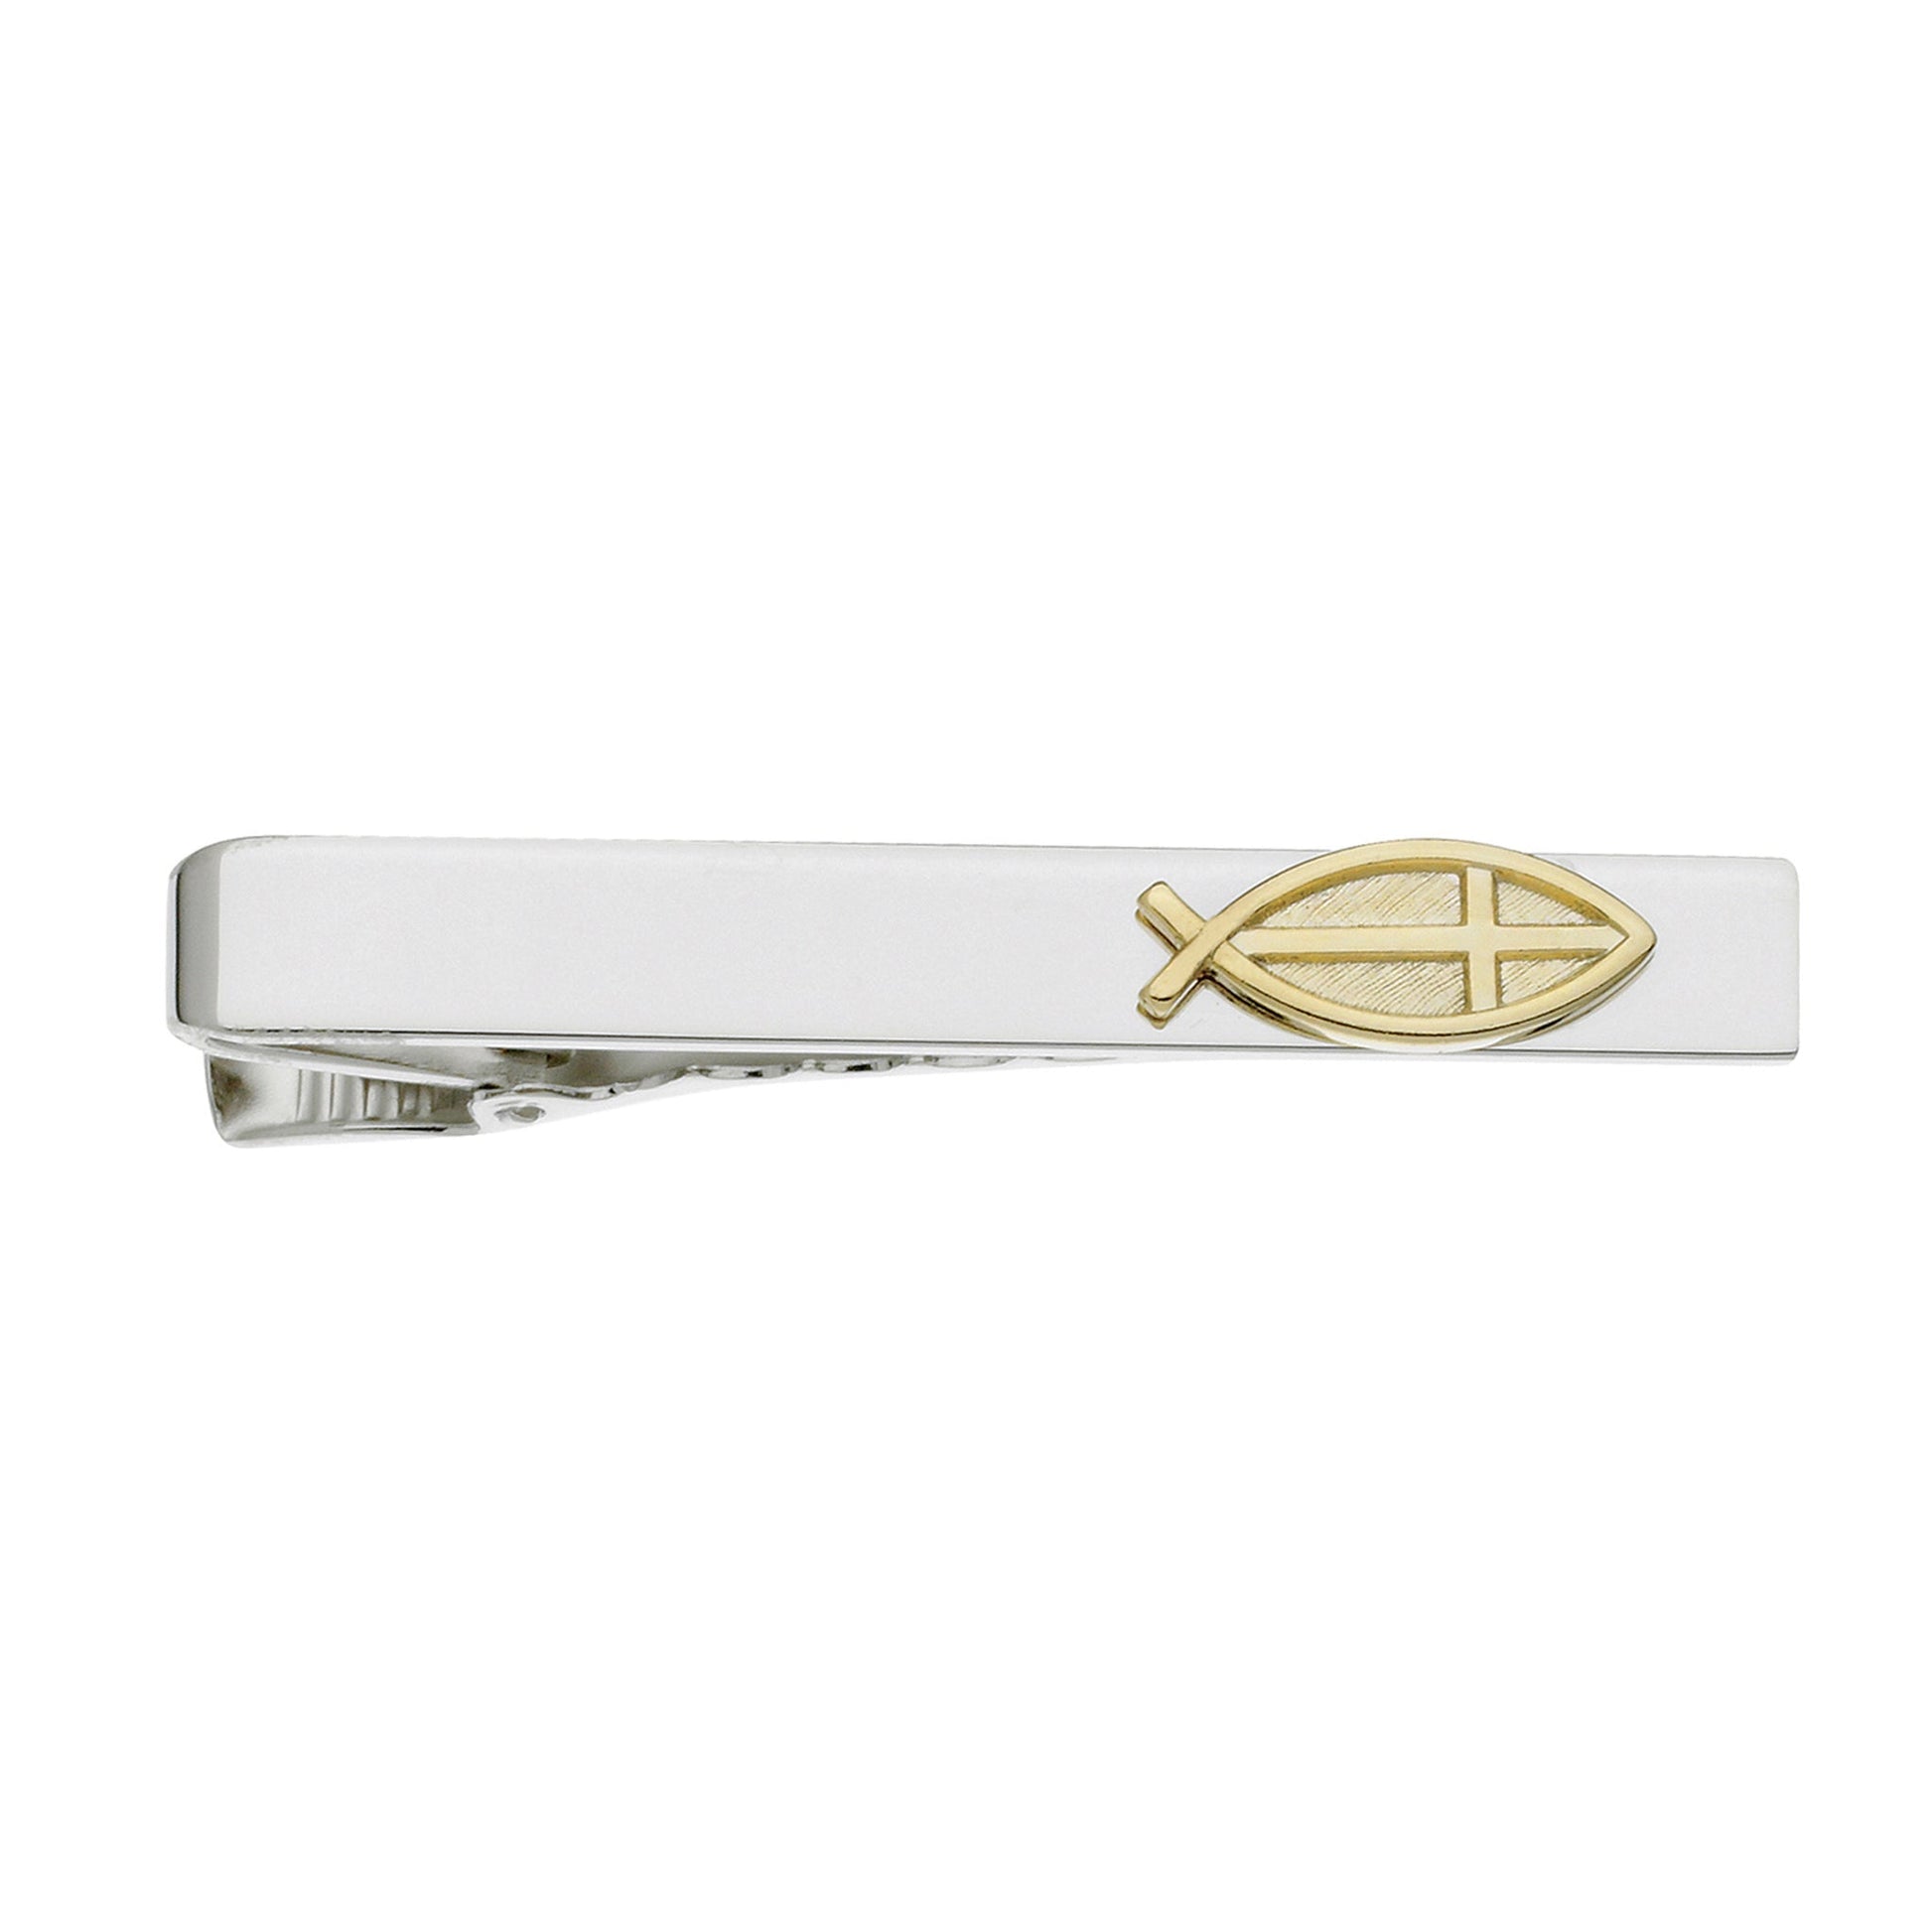 A christian fish tie bar displayed on a neutral white background.